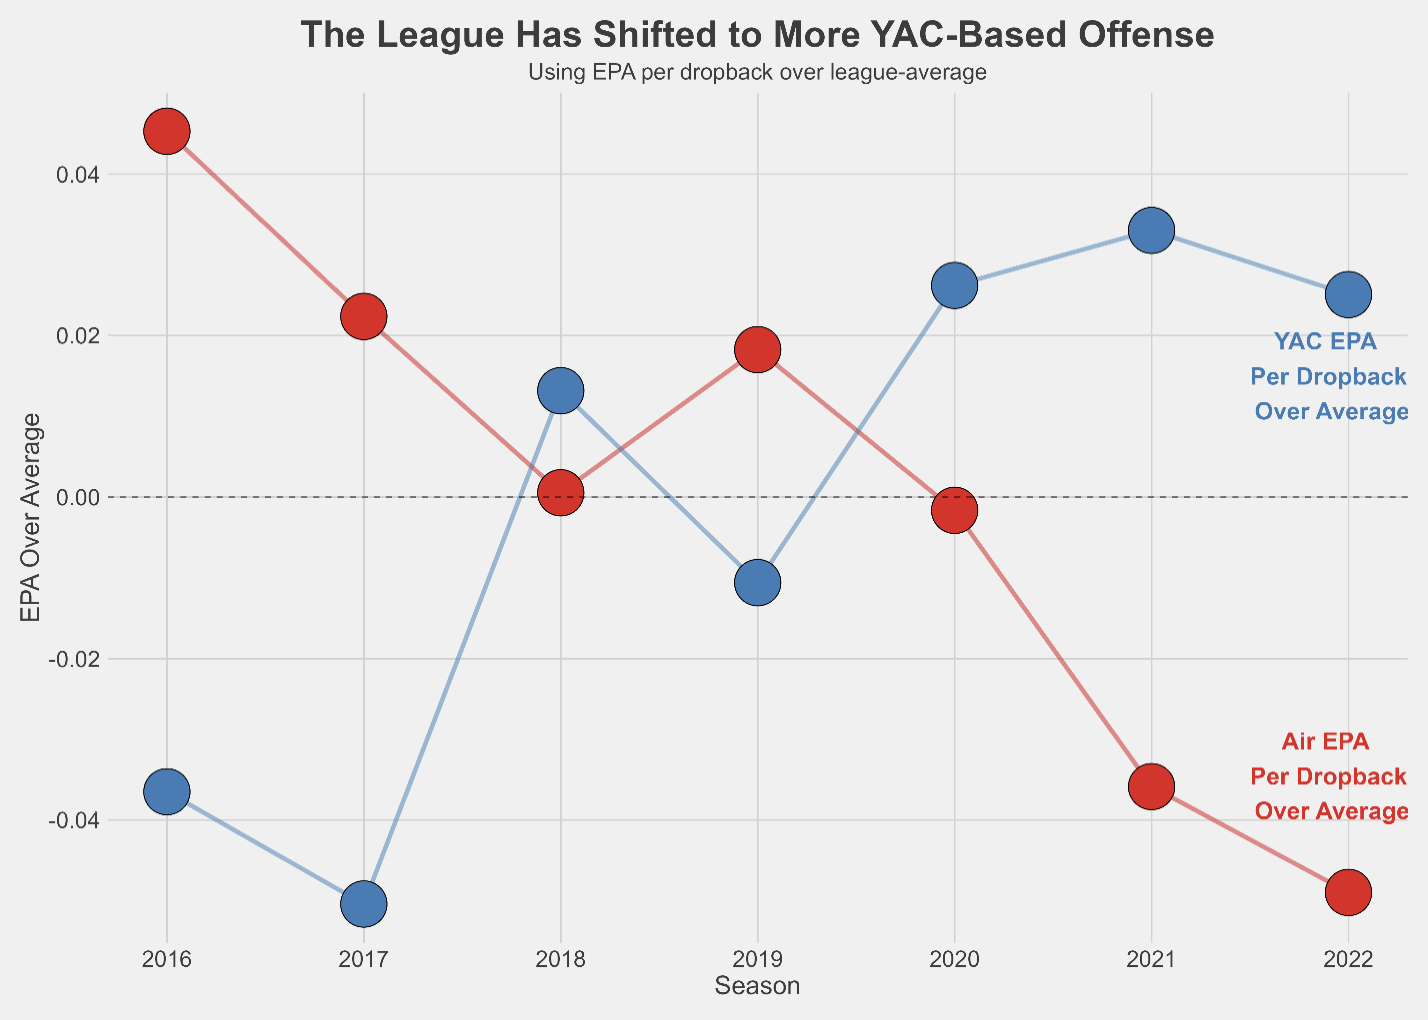 Chart: The League Has Shifted to More YAC-Based Offense